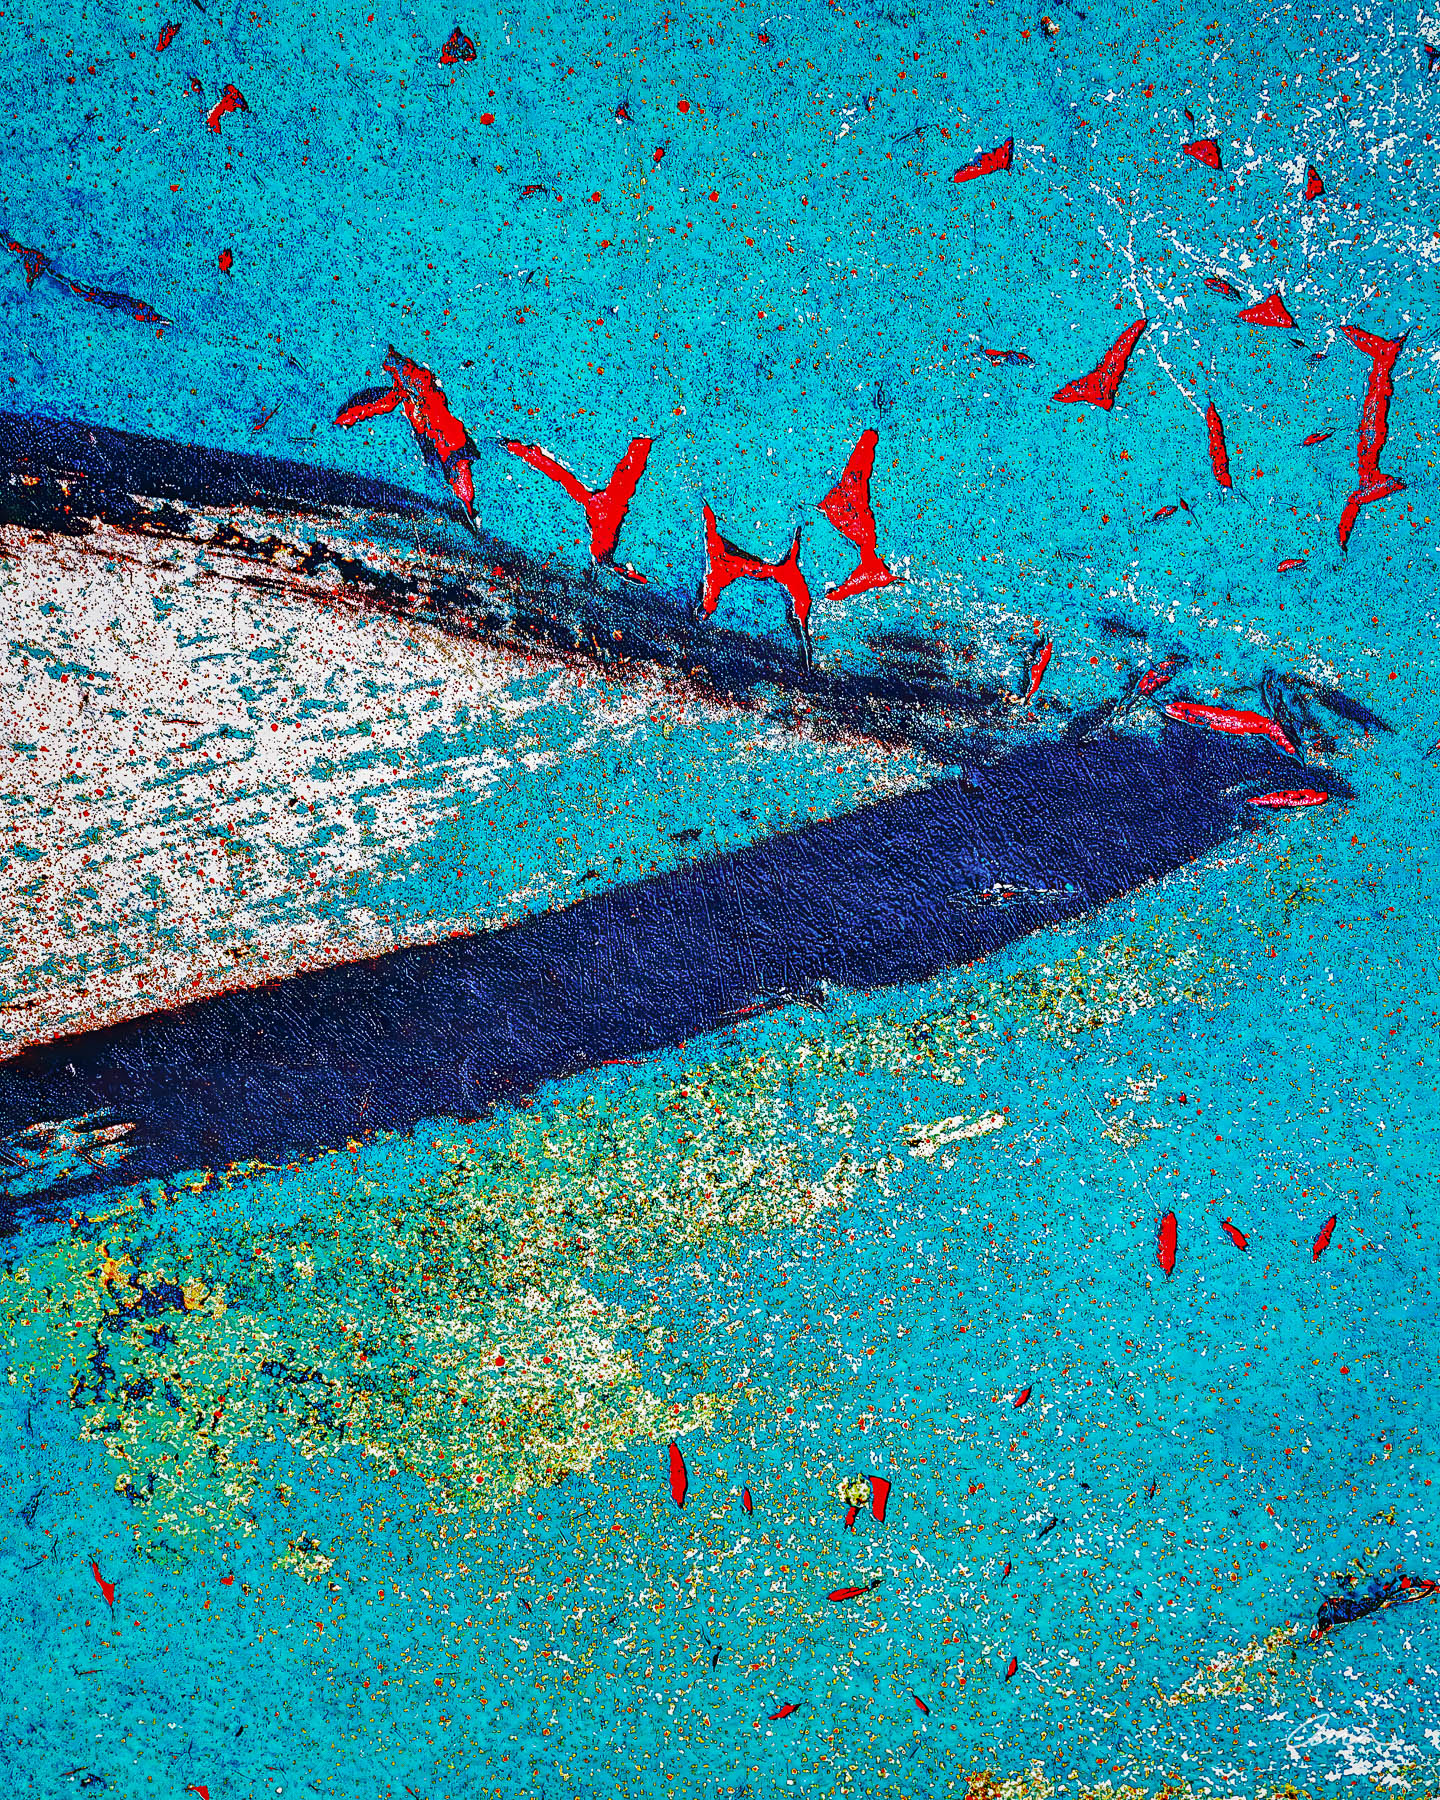 Graffiti with turquoise and red looks like a boat cutting through the water.